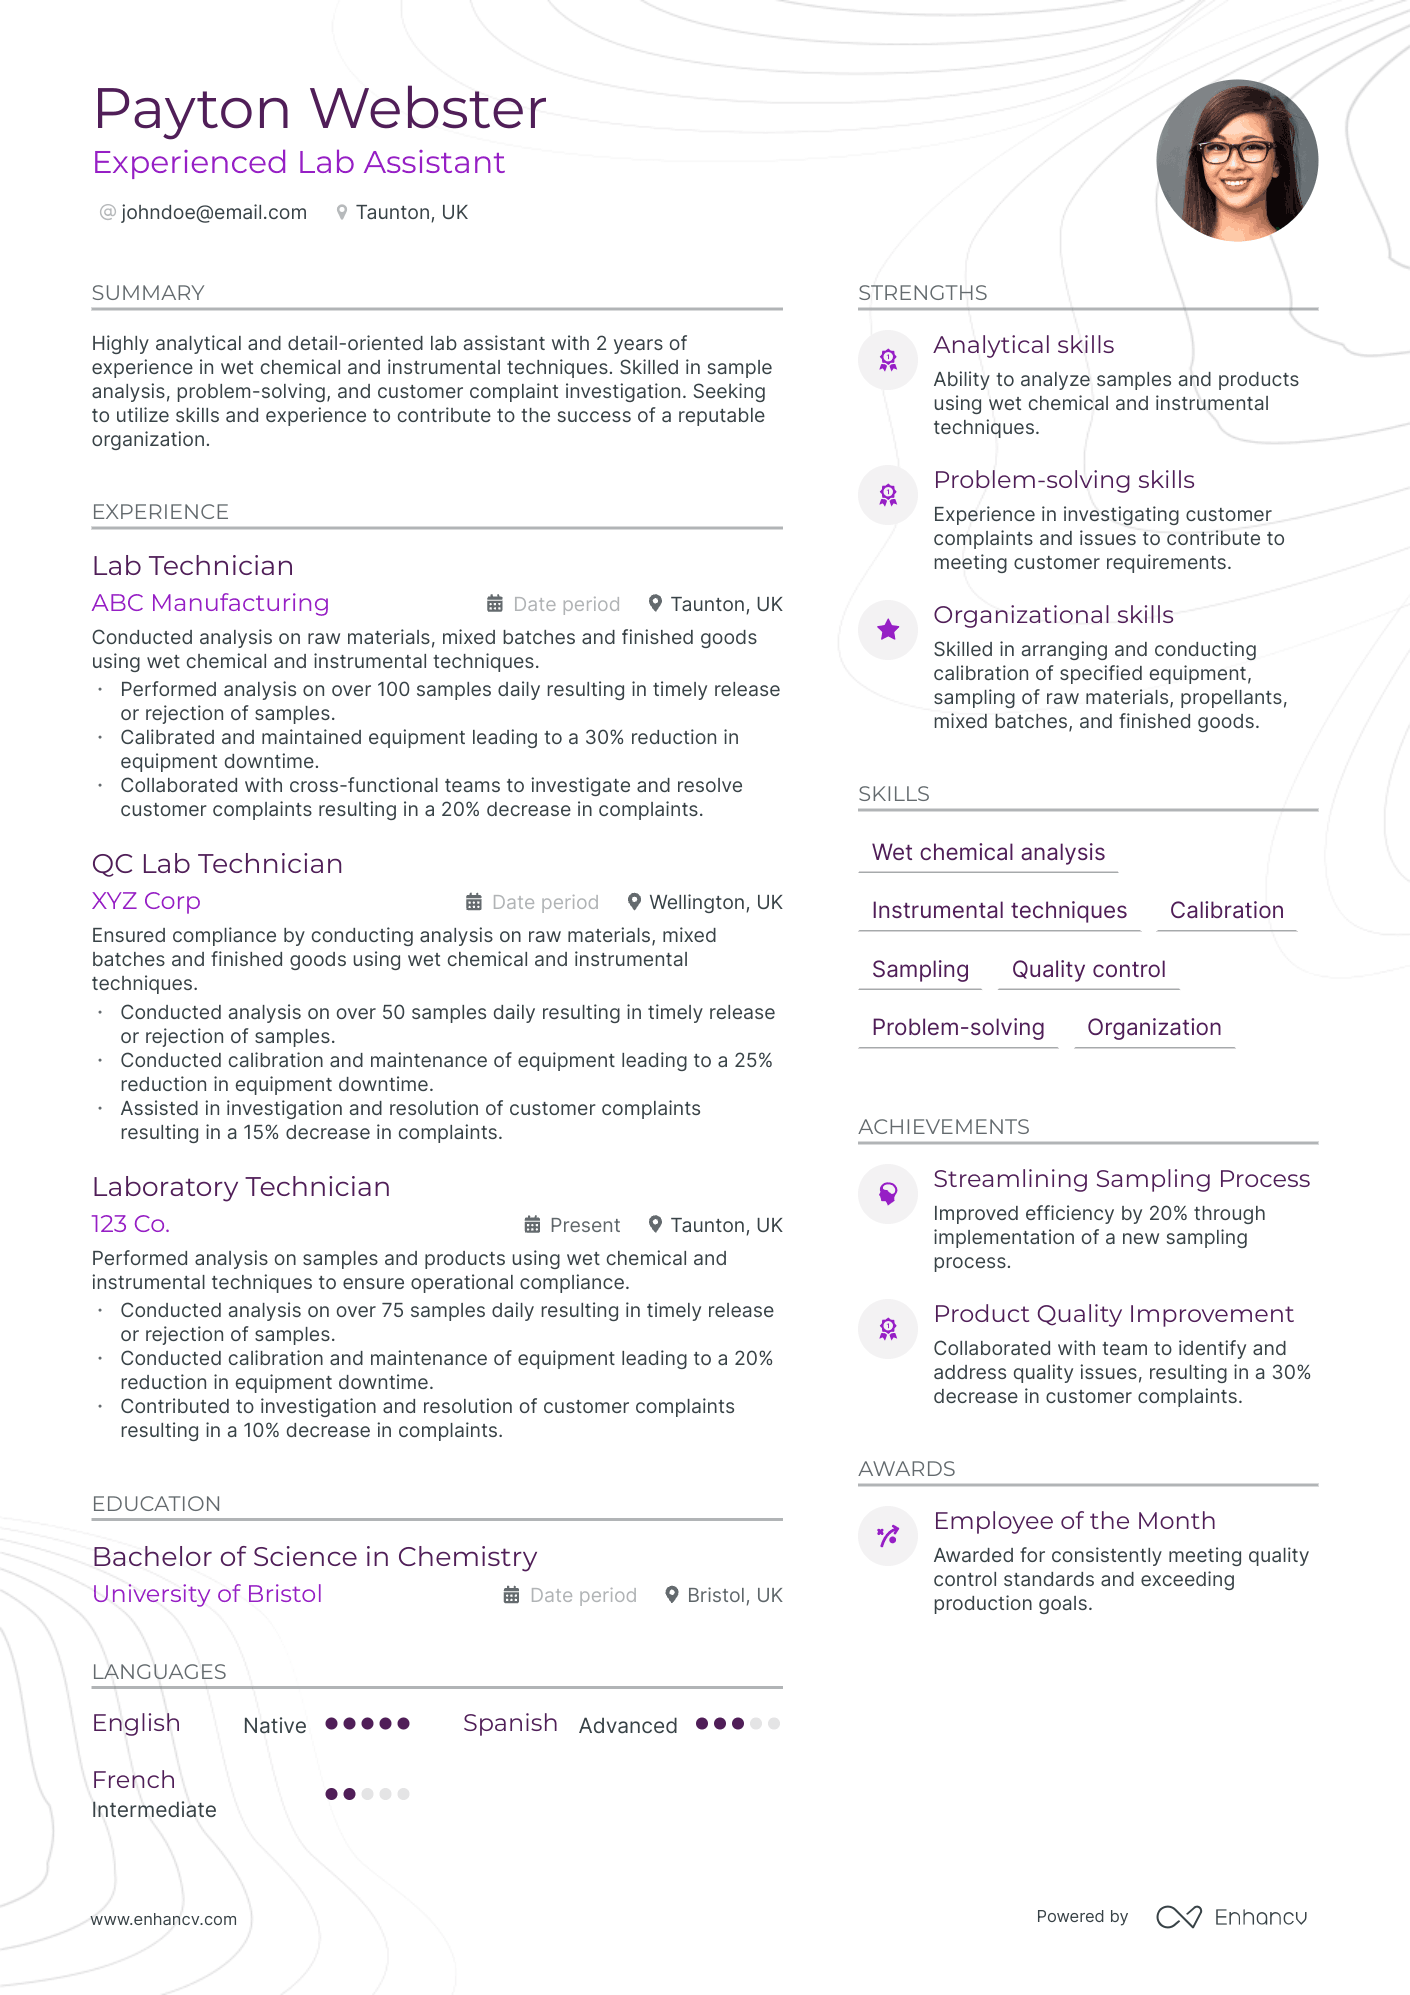 Lab Assistant resume example